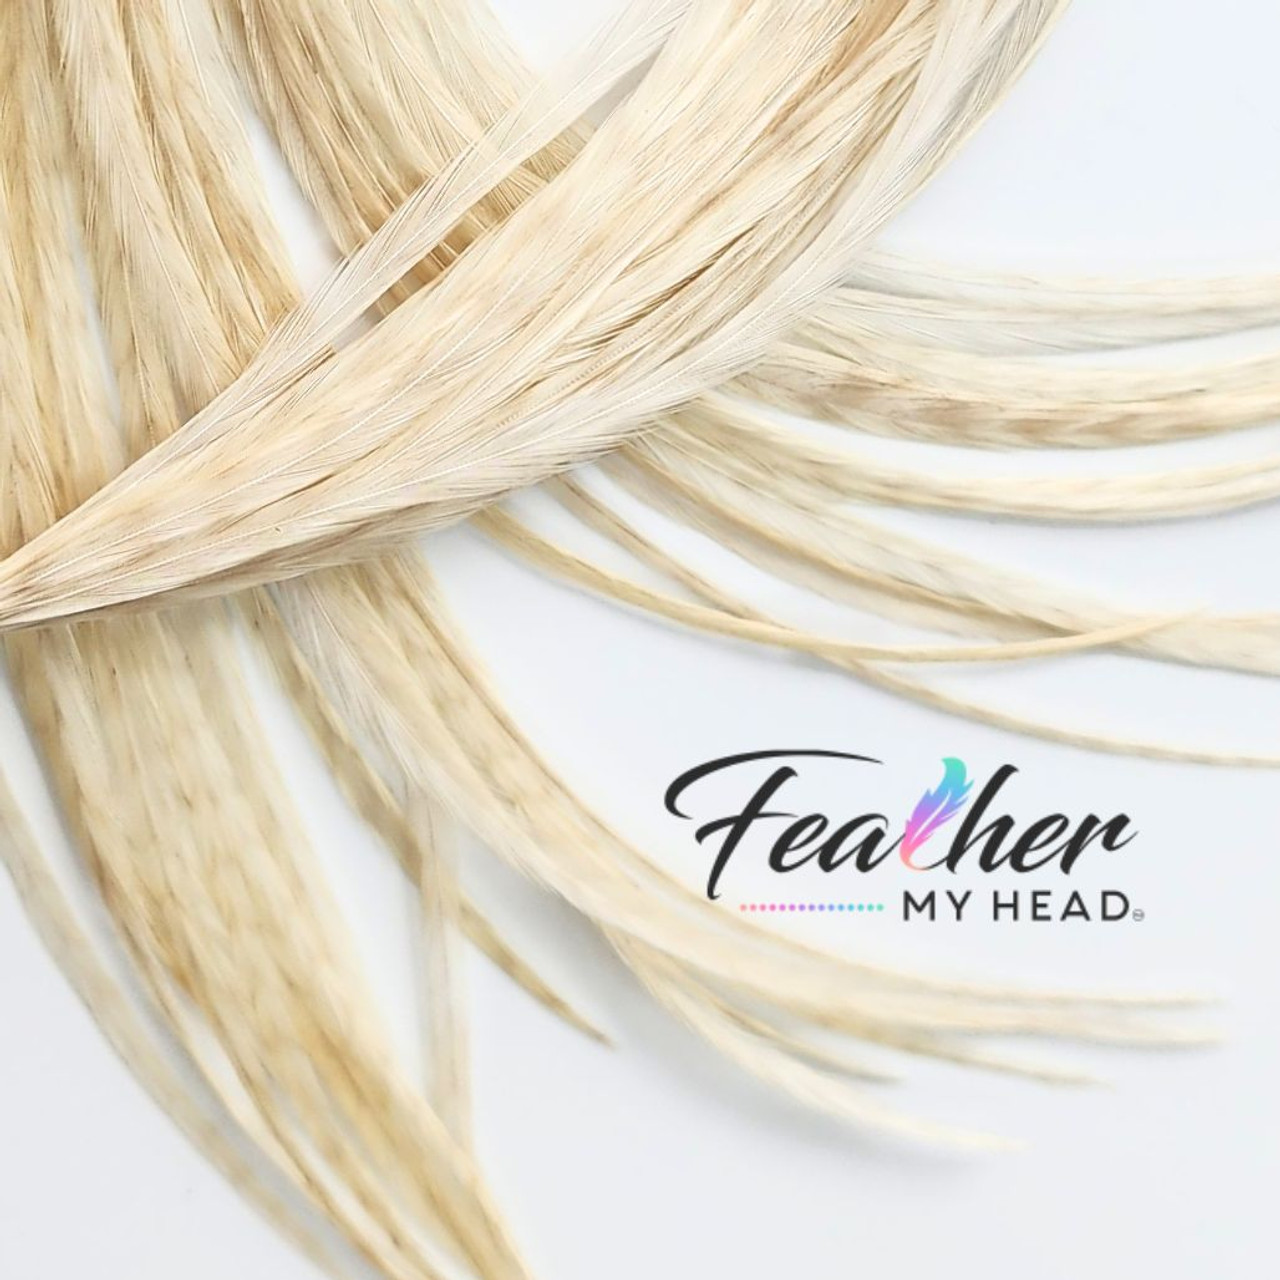 Feather Hair Extensions are Here! - Planet Hair - Wichita's Most